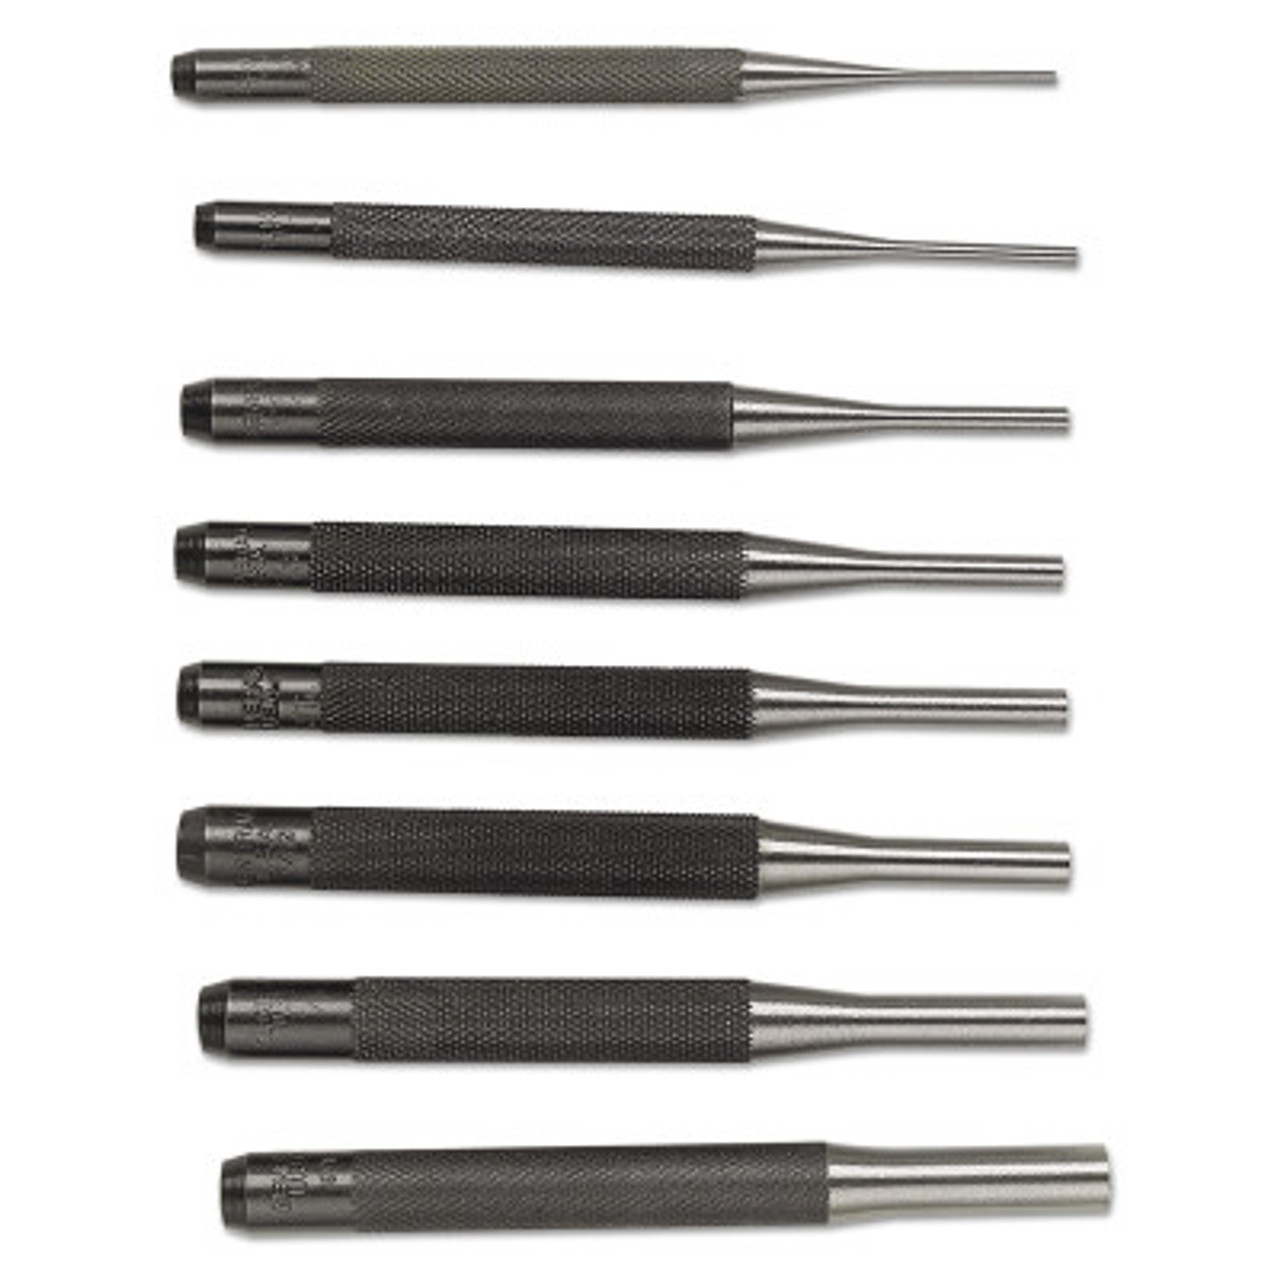 General Tools 1271ST 7 Piece Arch Punch Set